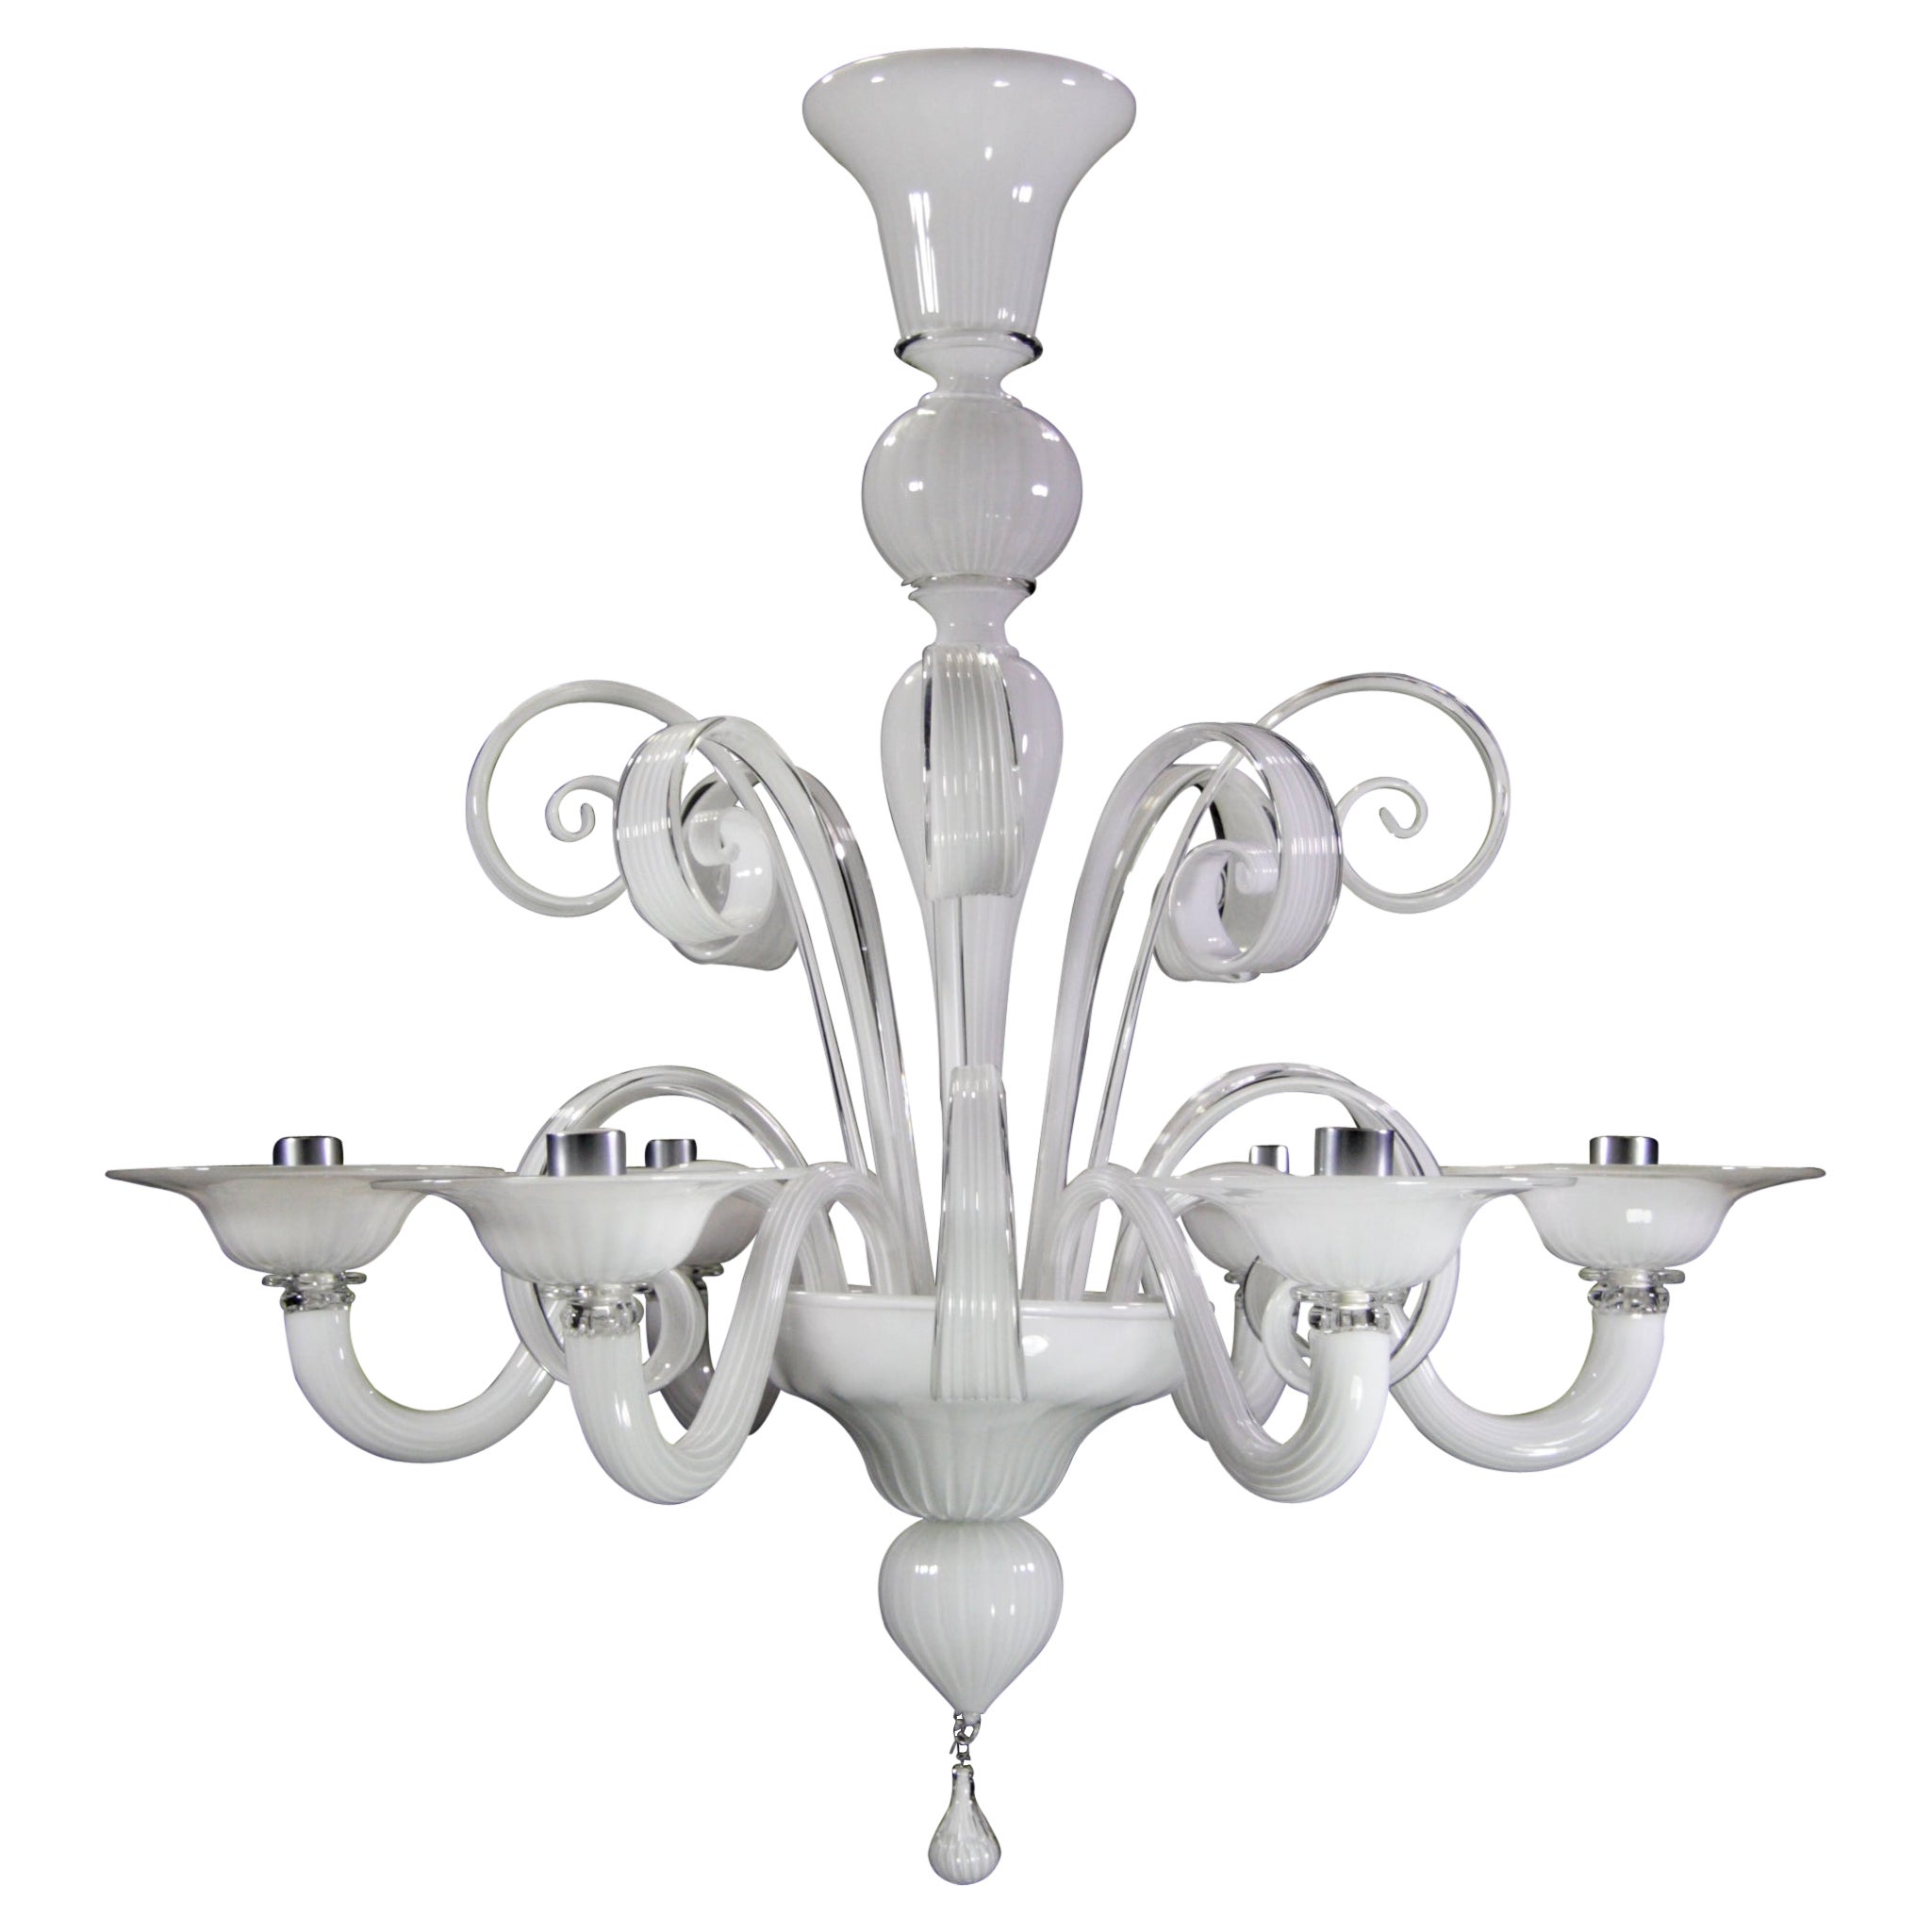 Chandelier 6 Arms White Handblown Artistic Murano Glass by Multiforme For Sale